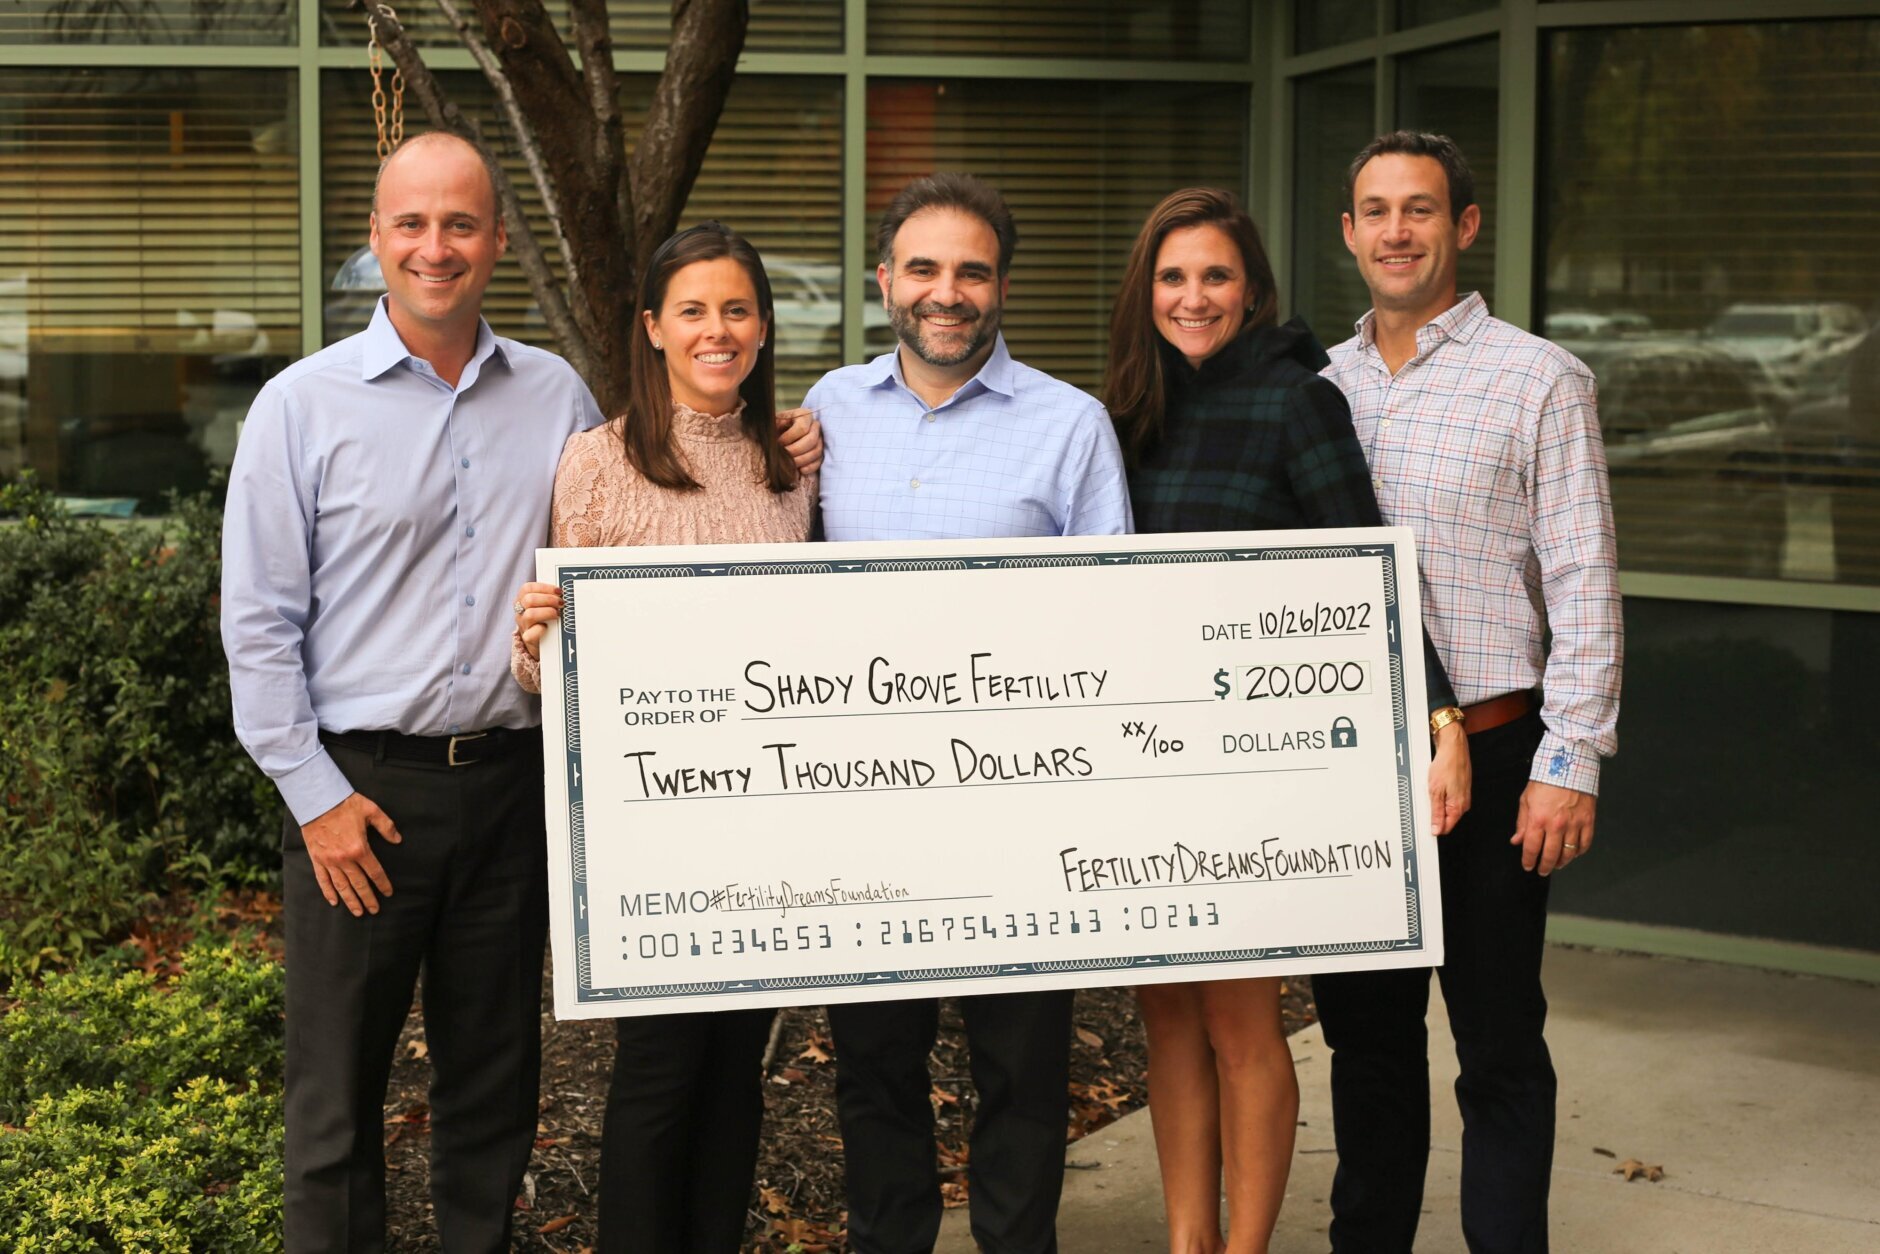 Shafer's foundation, Fertility Dreams, donate thousands of dollars to help other couples start families through fertility treatments.